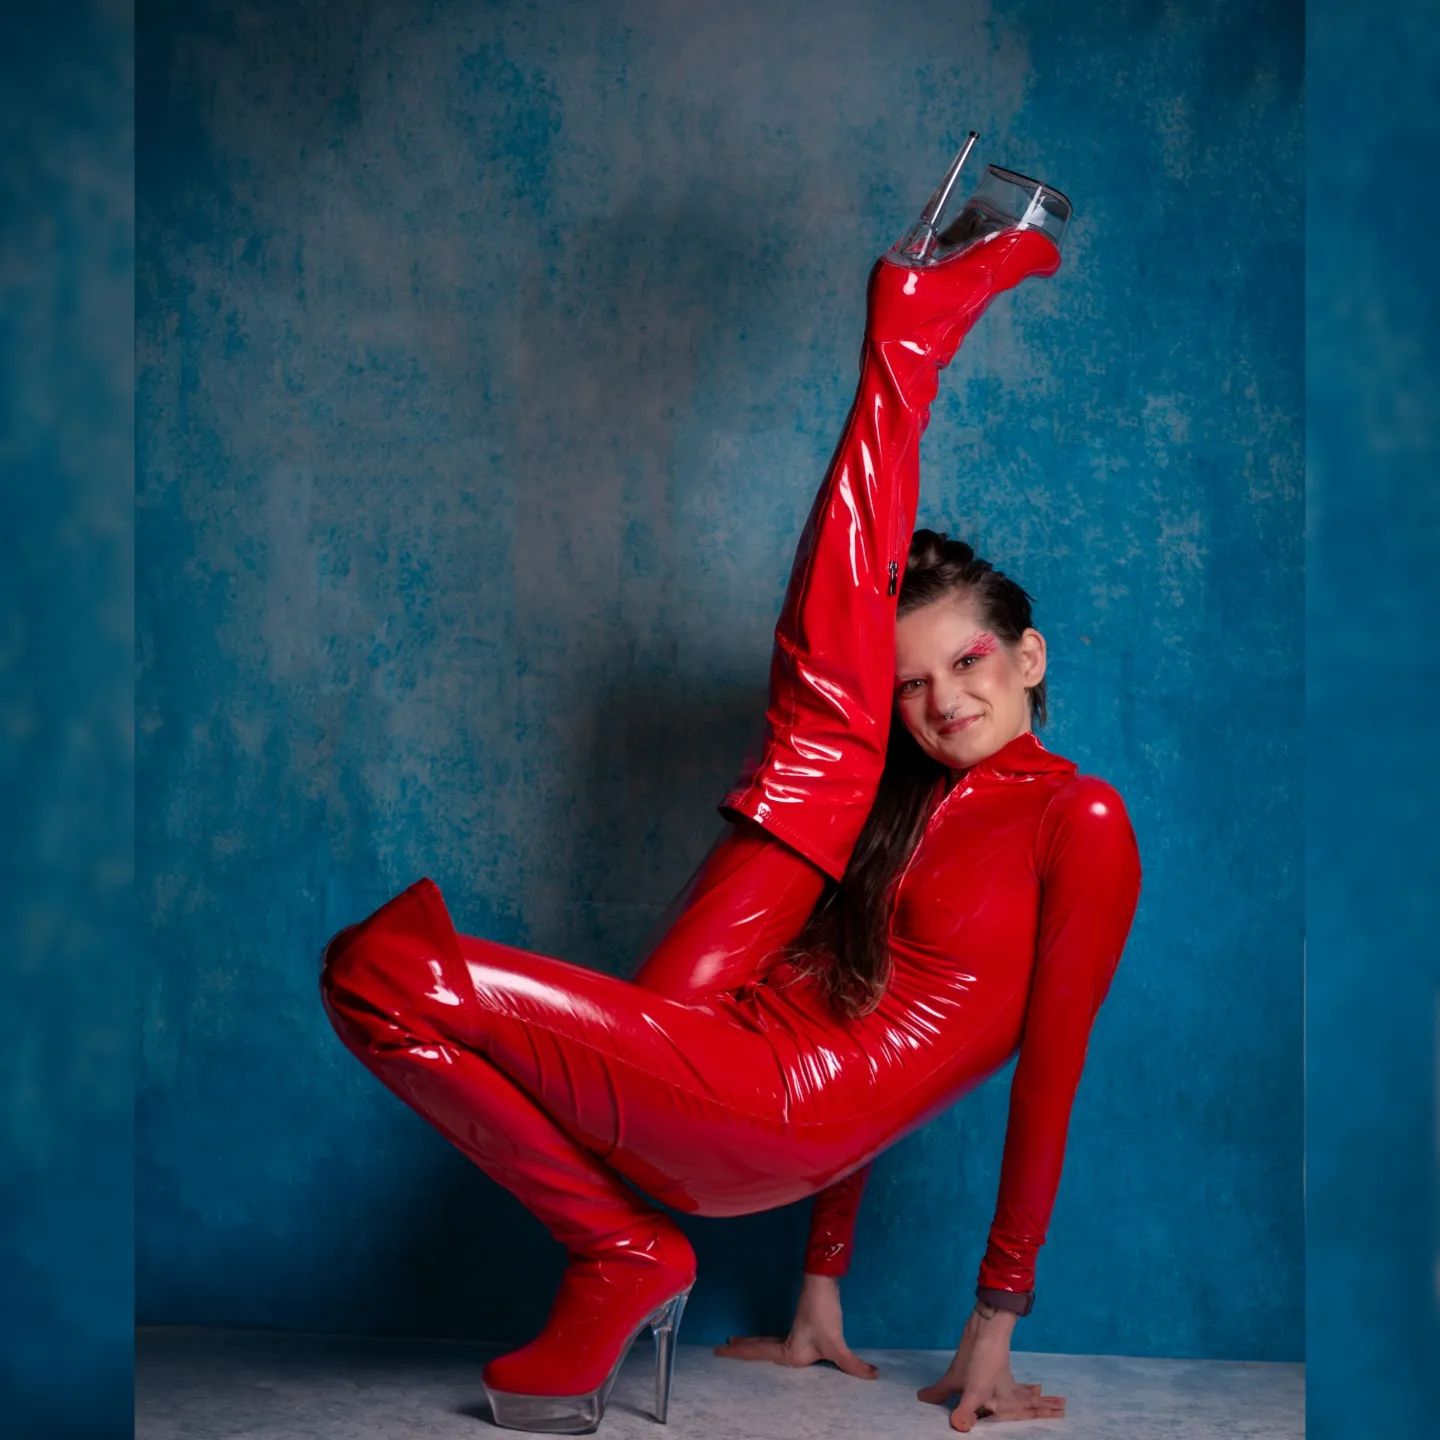 When the boots match you just got to find a way to fit them in the frame 🤣👠

📸 @vaiva_gallery 
🪮 @shannon.hairandco 
💄 @hairandmakeupbynicky 
🗺️ @eastcoast_creatives April meet 

#pvcfashion #bold #catsuitandboots #red #monochromemagic #ladyinred #legsfordays #photographymeetup #legsup #skintight #pvcheels #wetlook #standout #pvccatsuit #ukmodel #morrígansraven #ootd #portraitgames